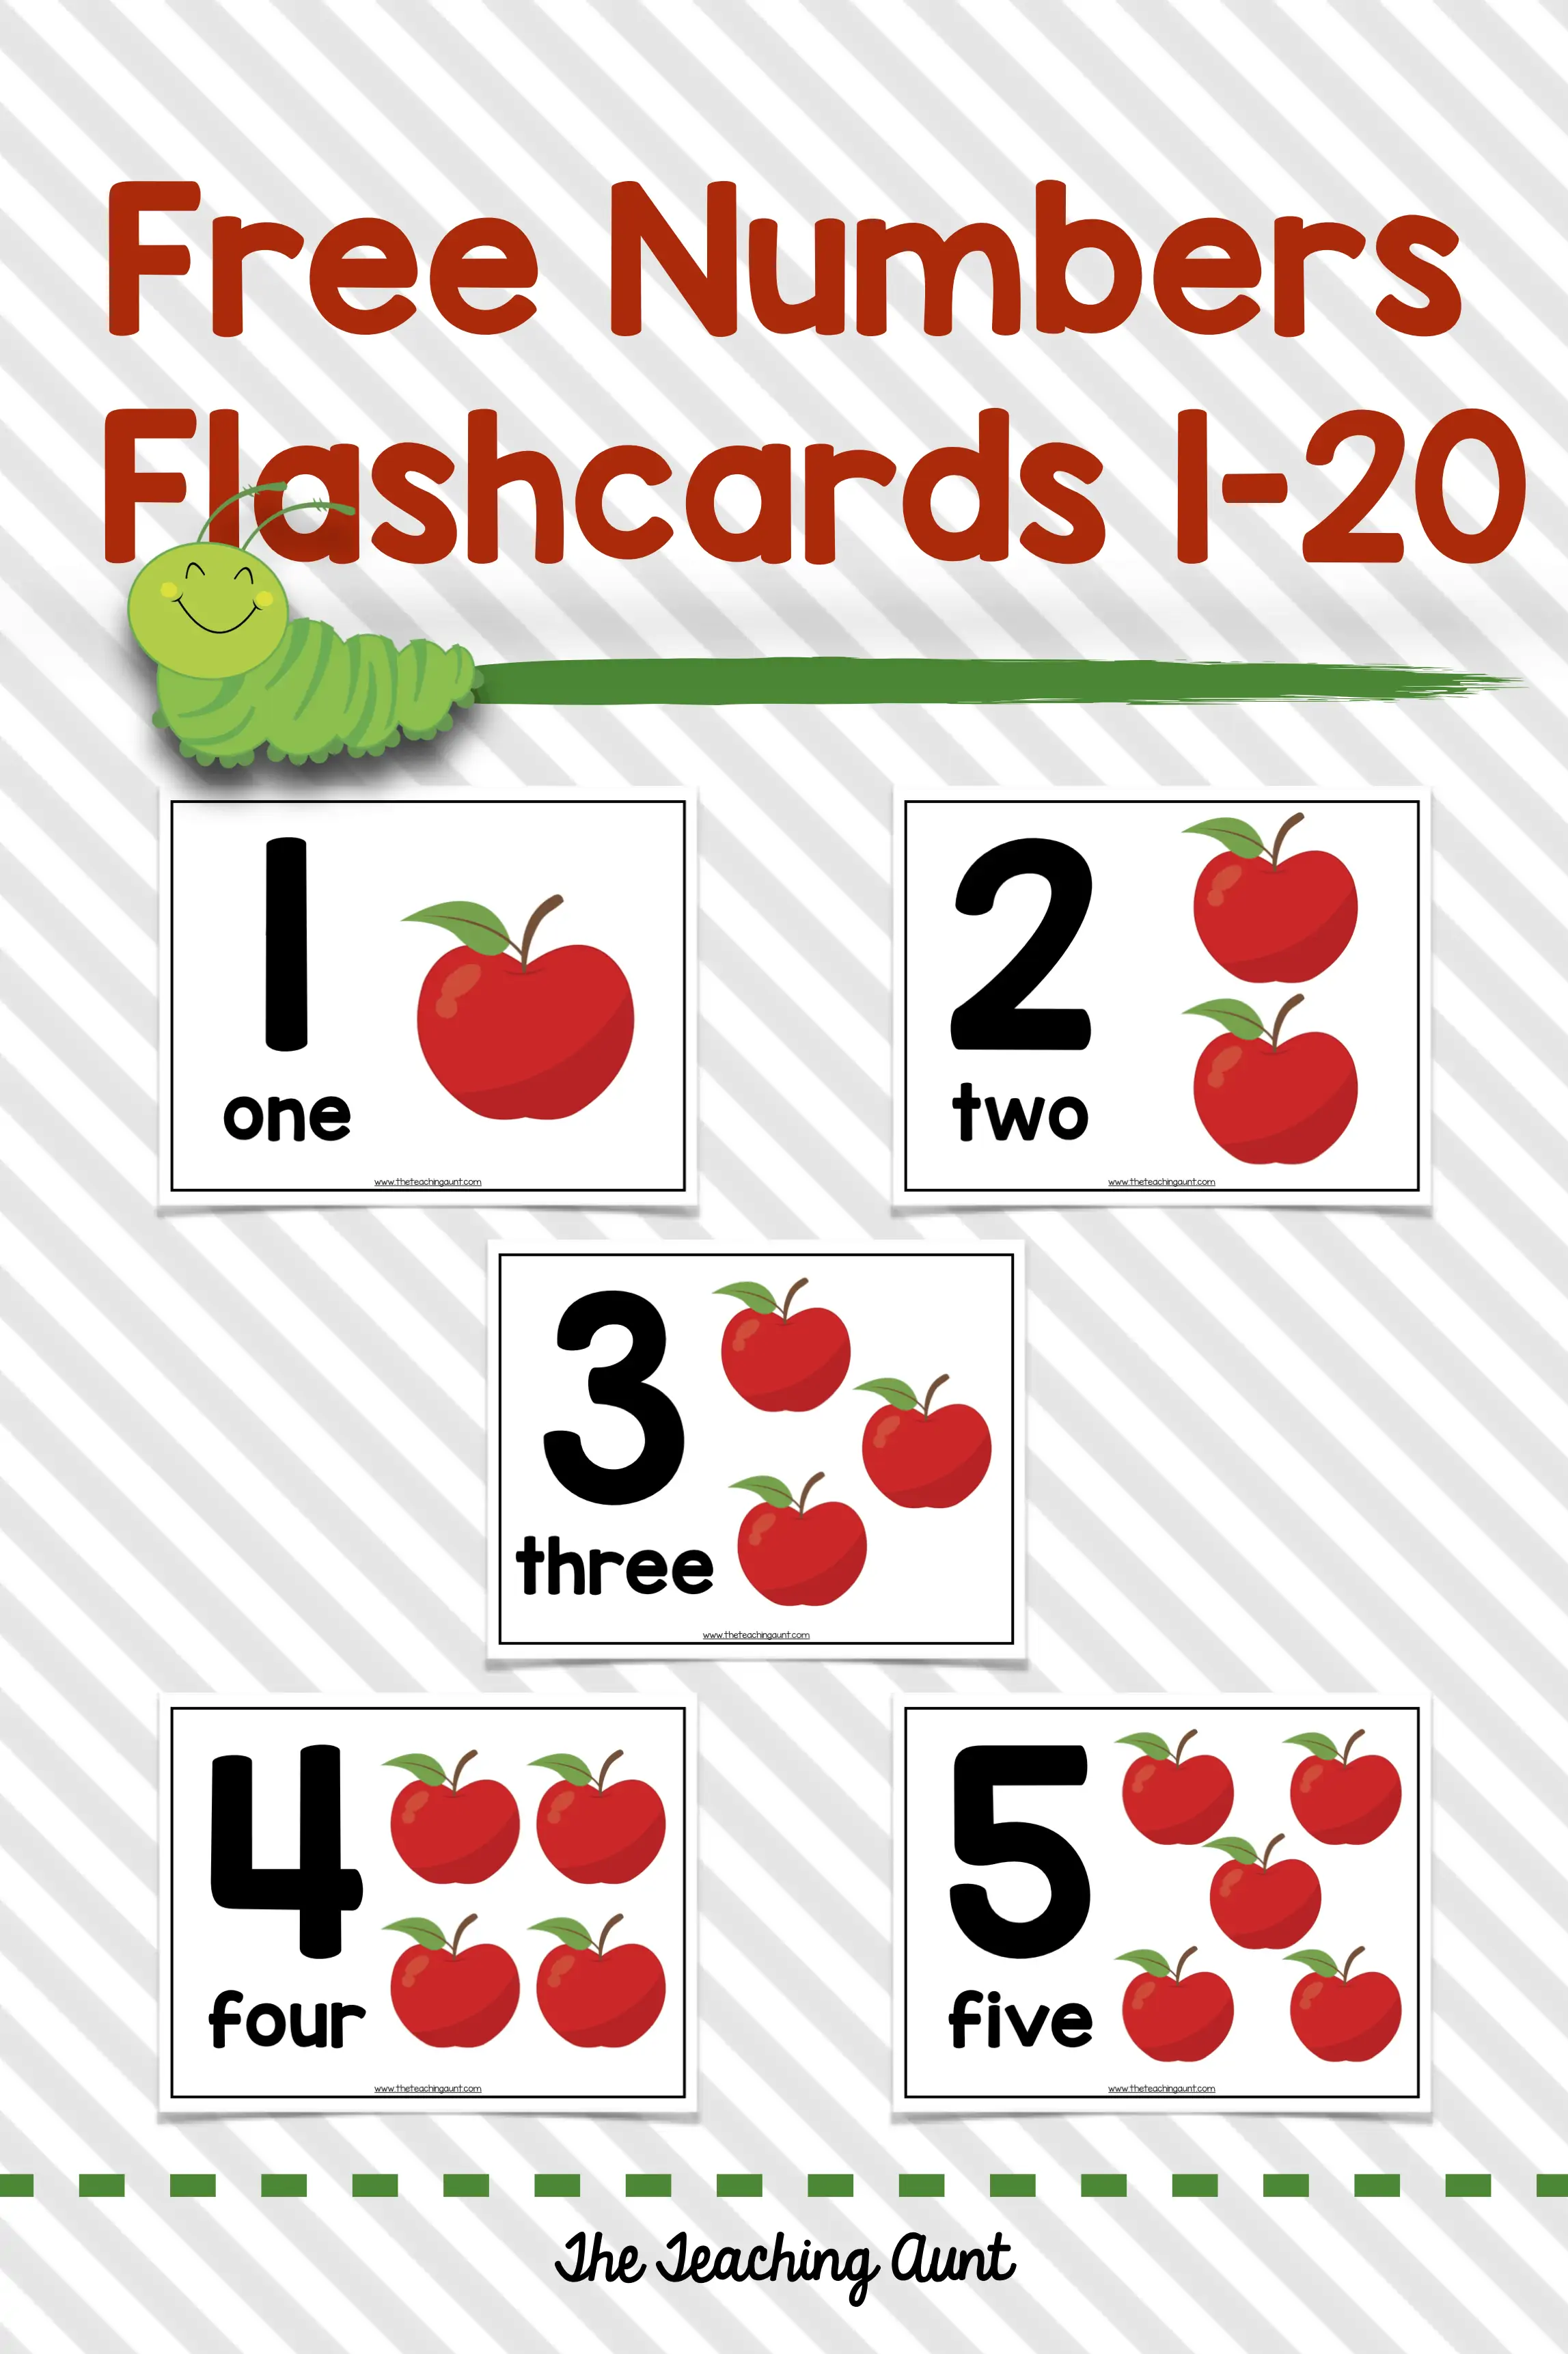 Numbers flashcards